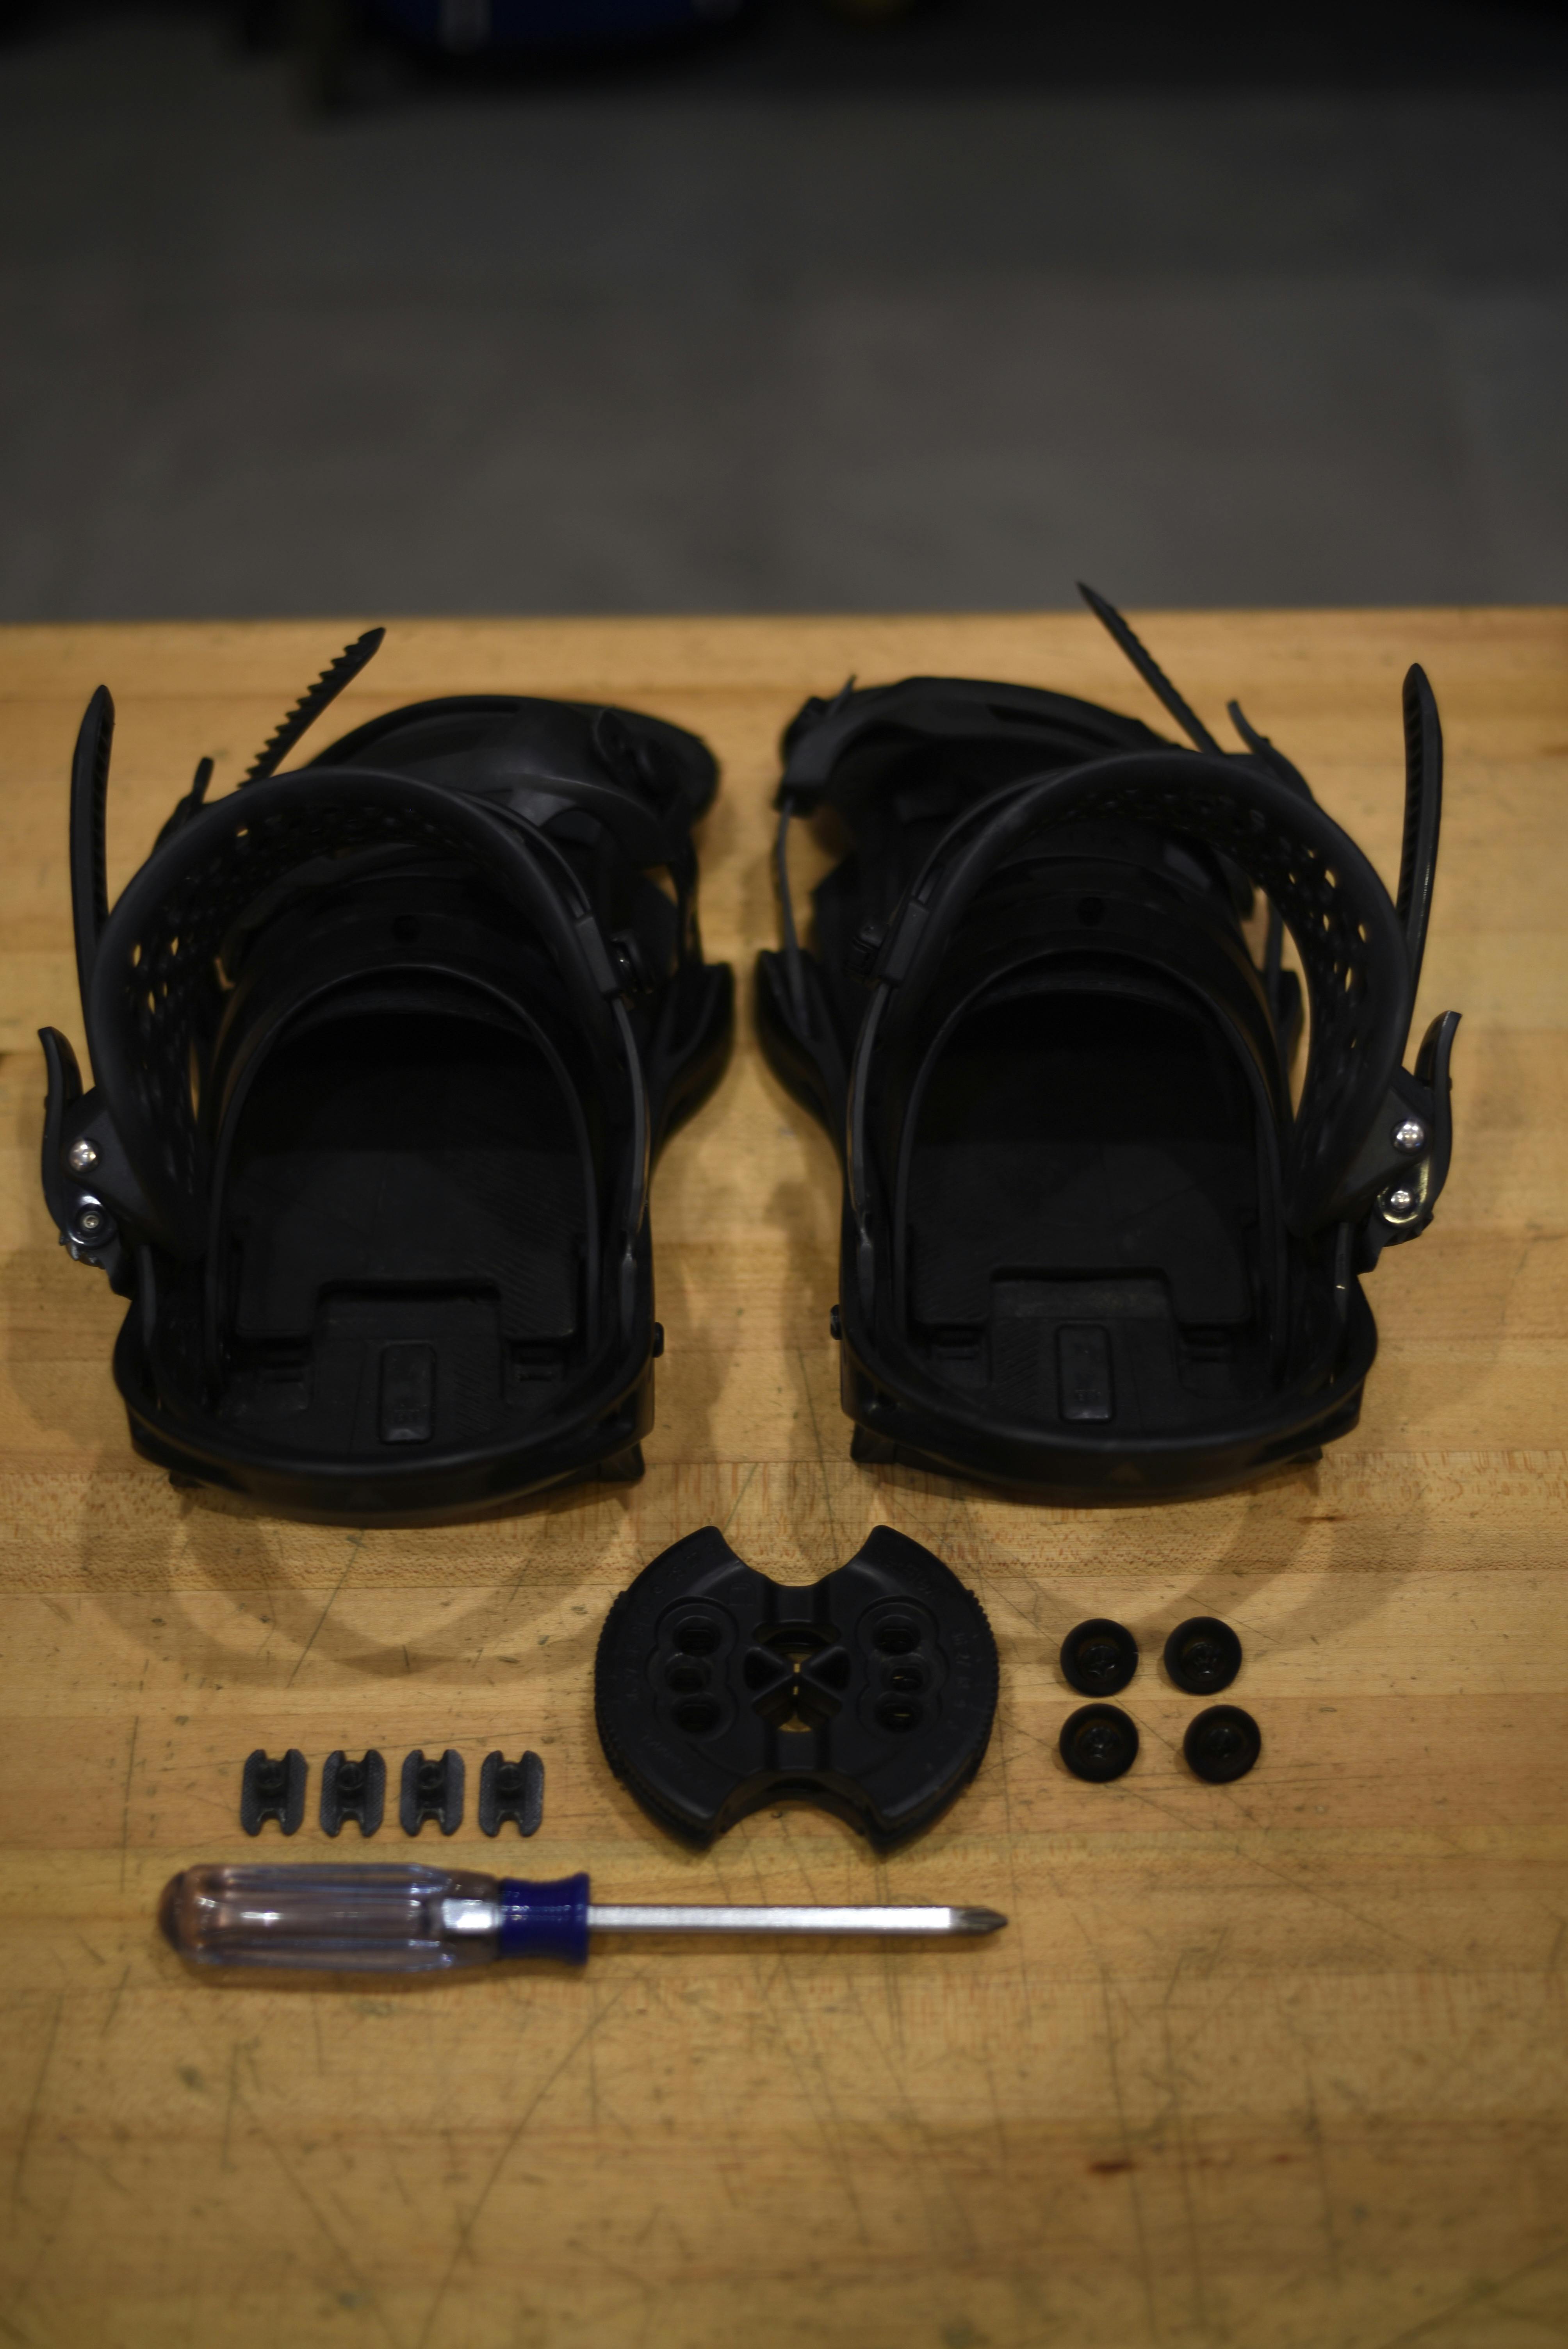 A pair of black snowboard bindings and the equipment needed to mount them